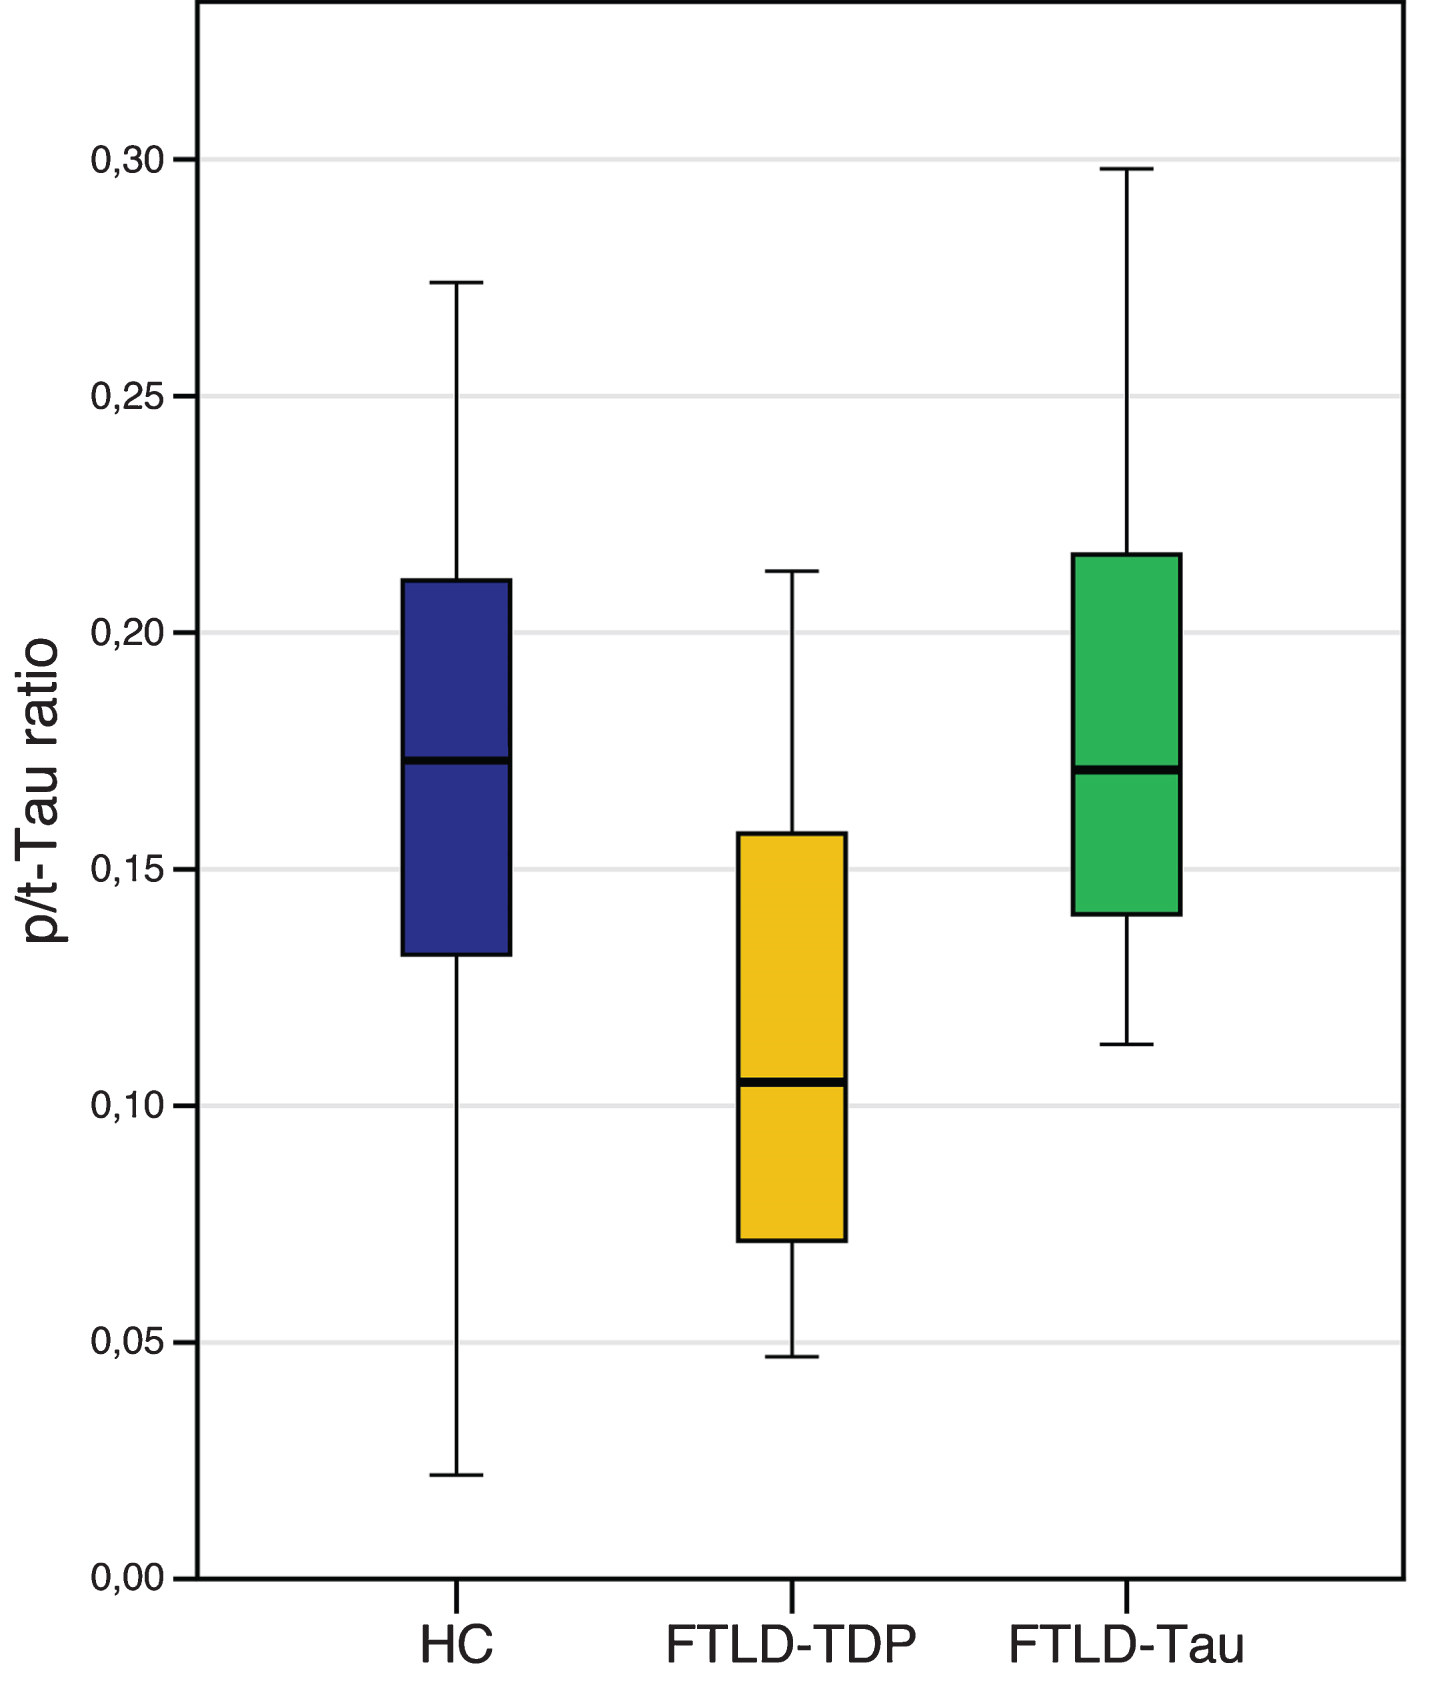 Levels of CSF phospho Tau/total Tau (p/t) ratio in FTLD-TDP and FTLD-Tau, compared to healthy controls (HC). Horizontal thick lines illustrate median cerebrospinal fluid (CSF) values, notches correspond to interquartile range, error bars depict 25th to 75th percentile range of data. HC: age-matched healthy controls; FTLD-TPD: including patients carrying a GRN mutation, TARDBP mutations, C9orf72 mutations and patients with FTD-motor neuron disease; FTLD-Tau: including clinically diagnosed progressive supranuclear palsy (PSP) and patients carrying a MAPT mutation.